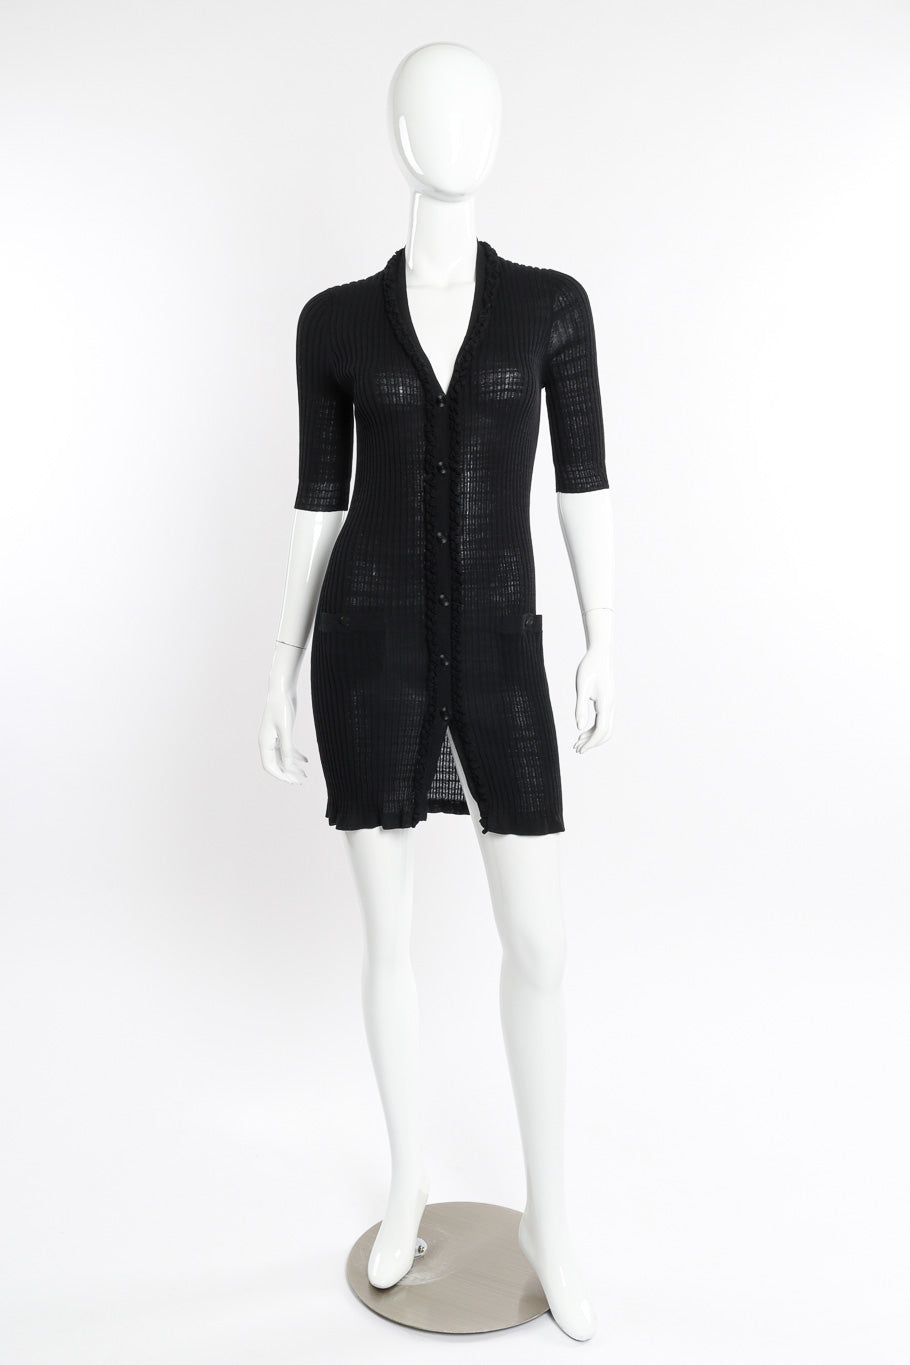 Chanel Ribbed Knit Cardigan front view on mannequin @Recessla